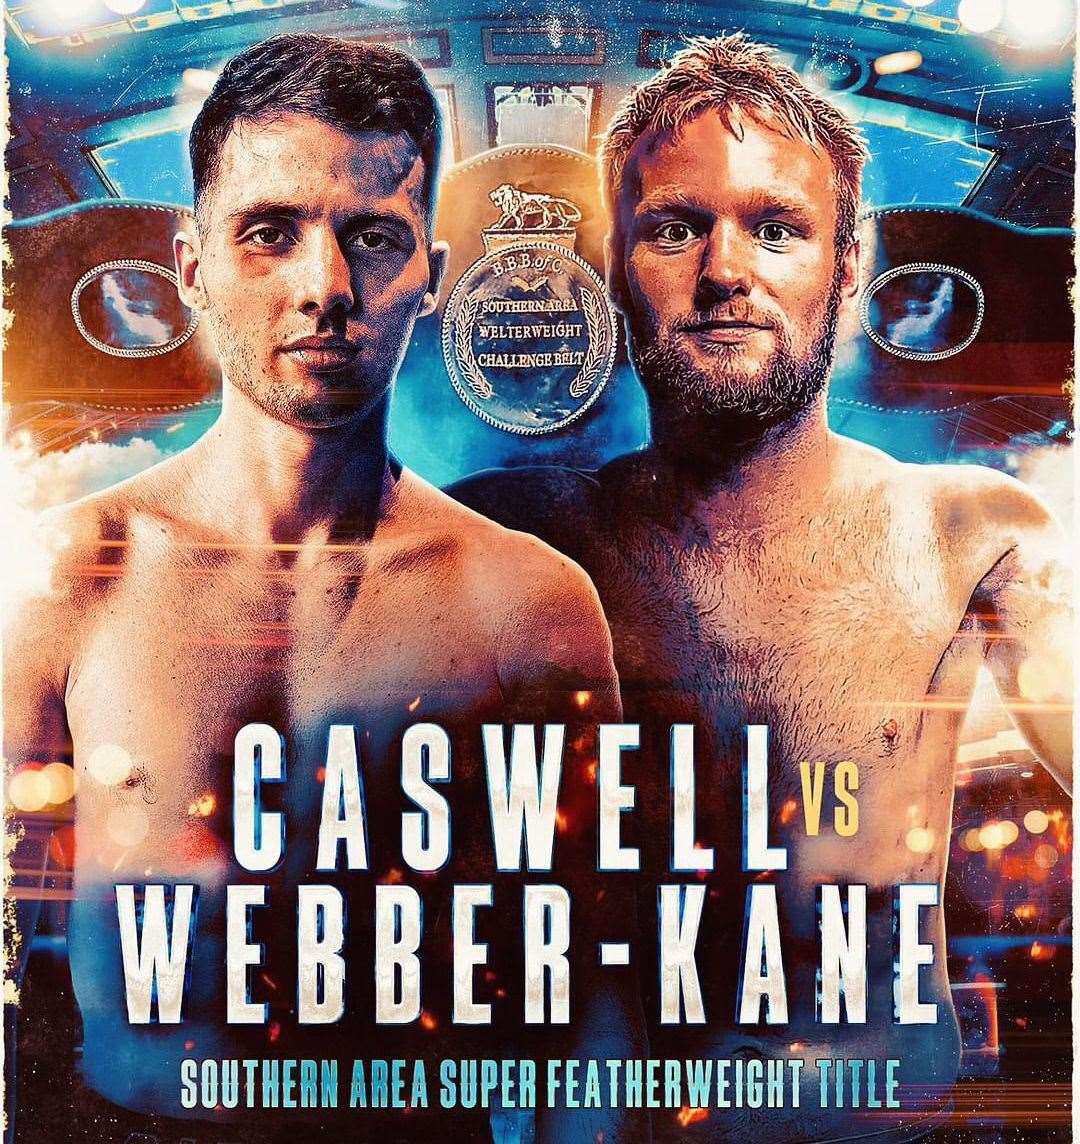 Caswell vs Webber-Kane promotion poster ahead of their York Hall fight in February